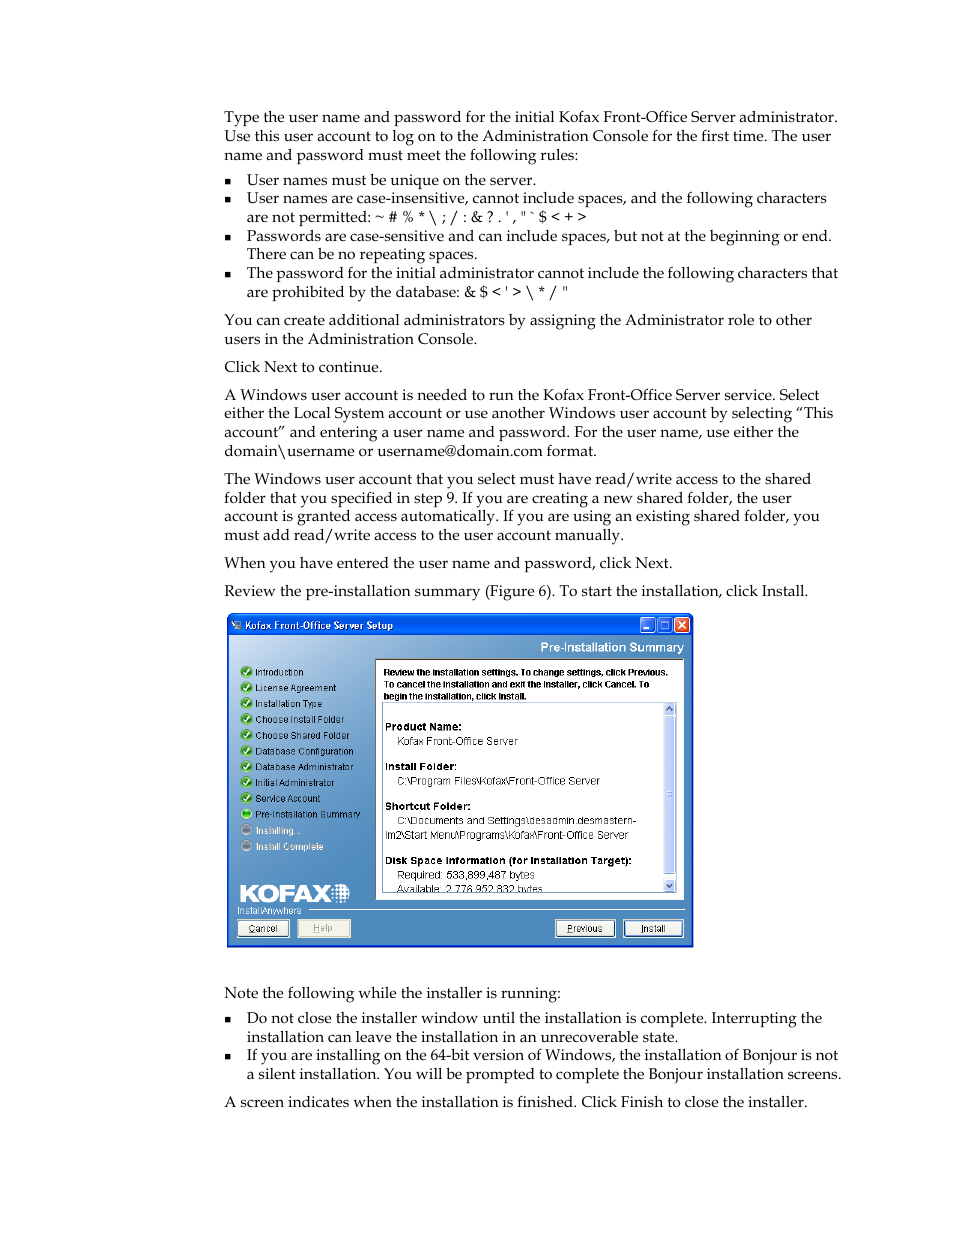 Kofax Front-Office Server 3.0 User Manual | Page 31 / 46